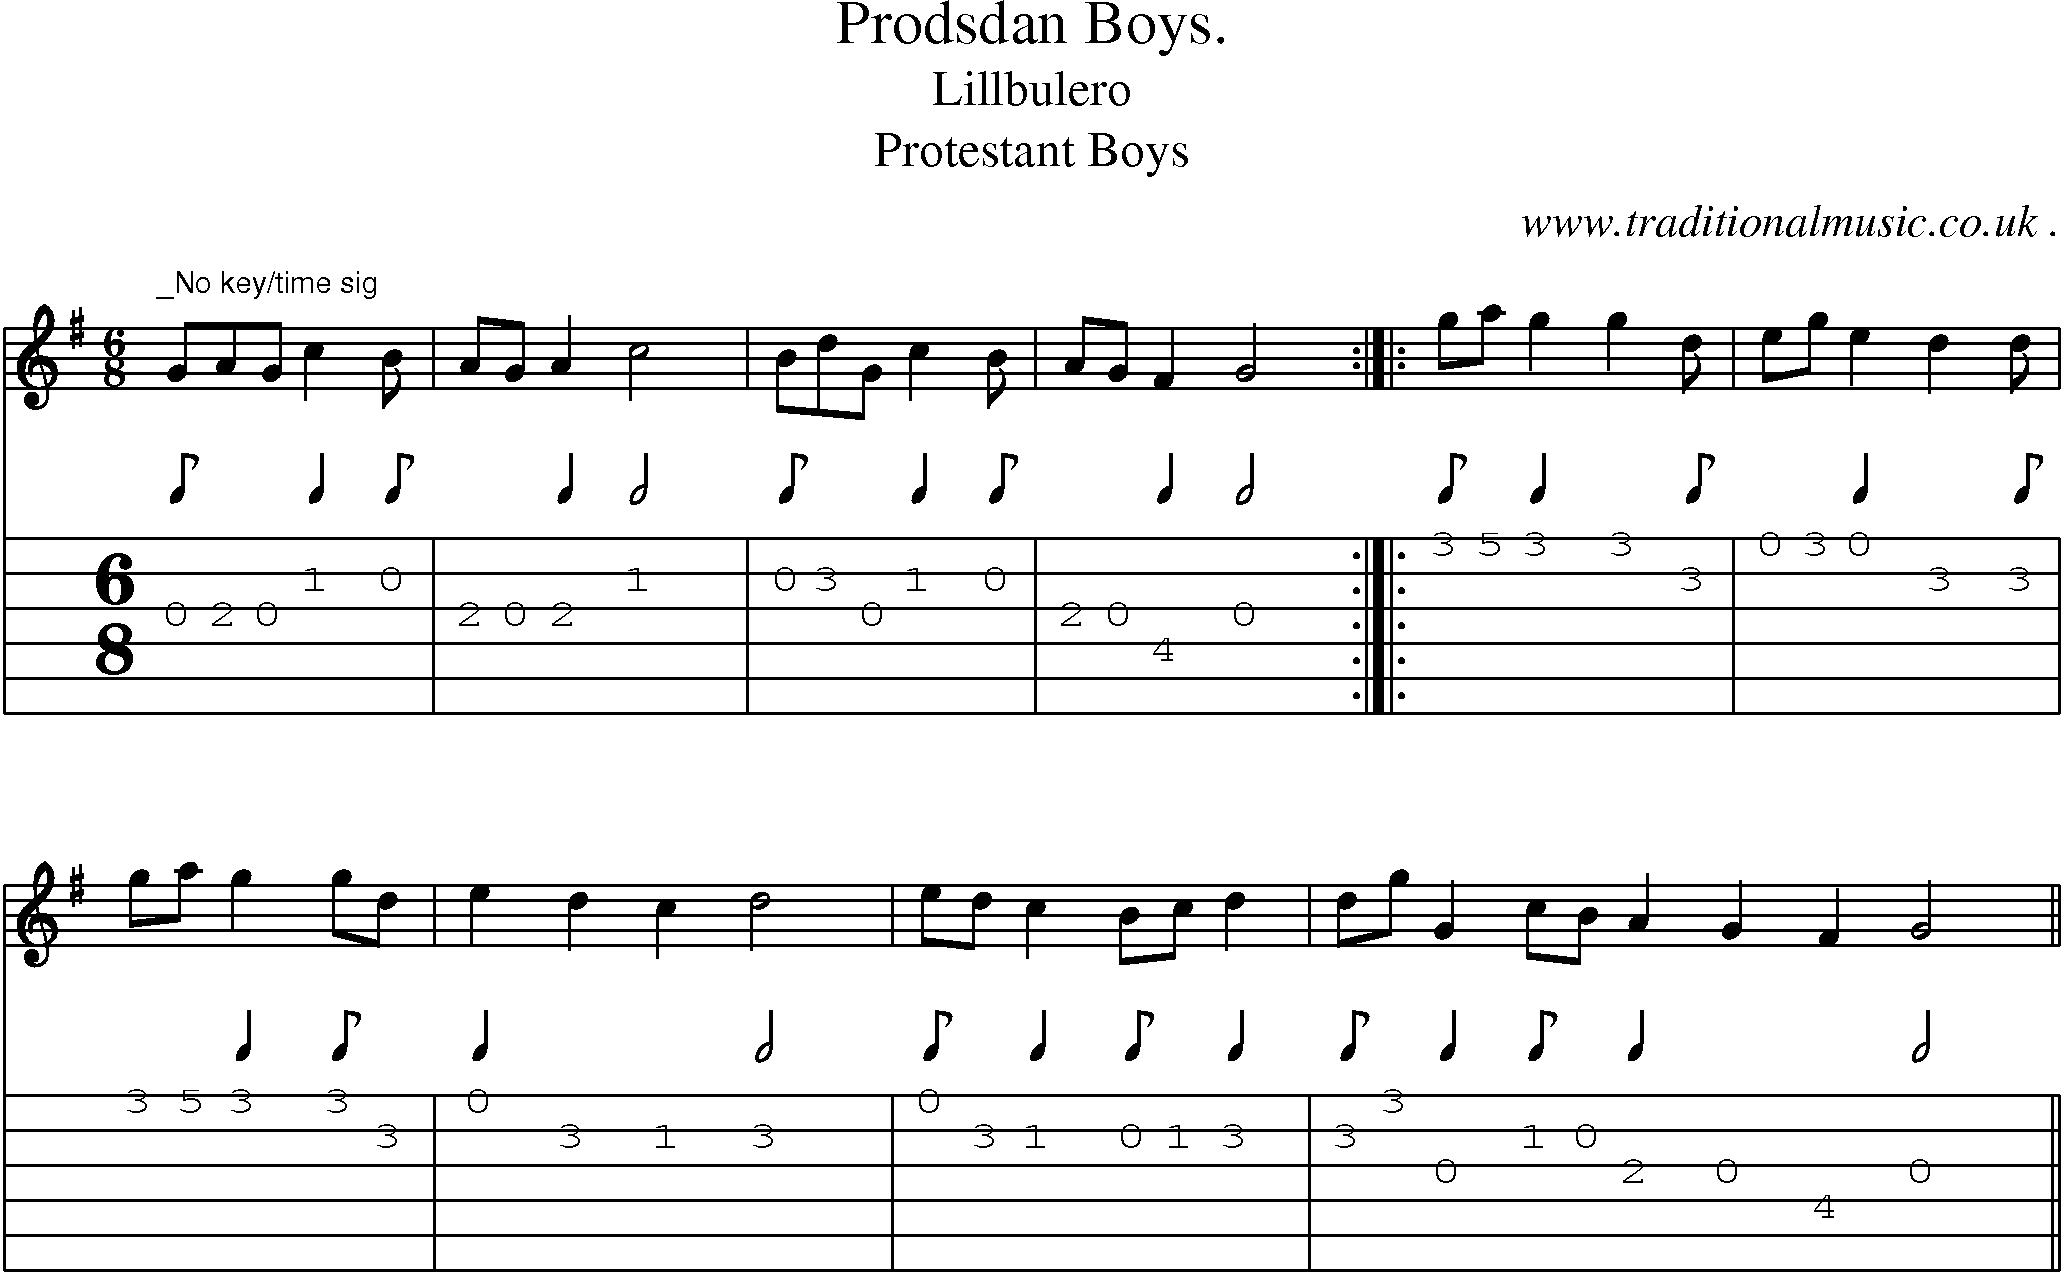 Sheet-Music and Guitar Tabs for Prodsdan Boys